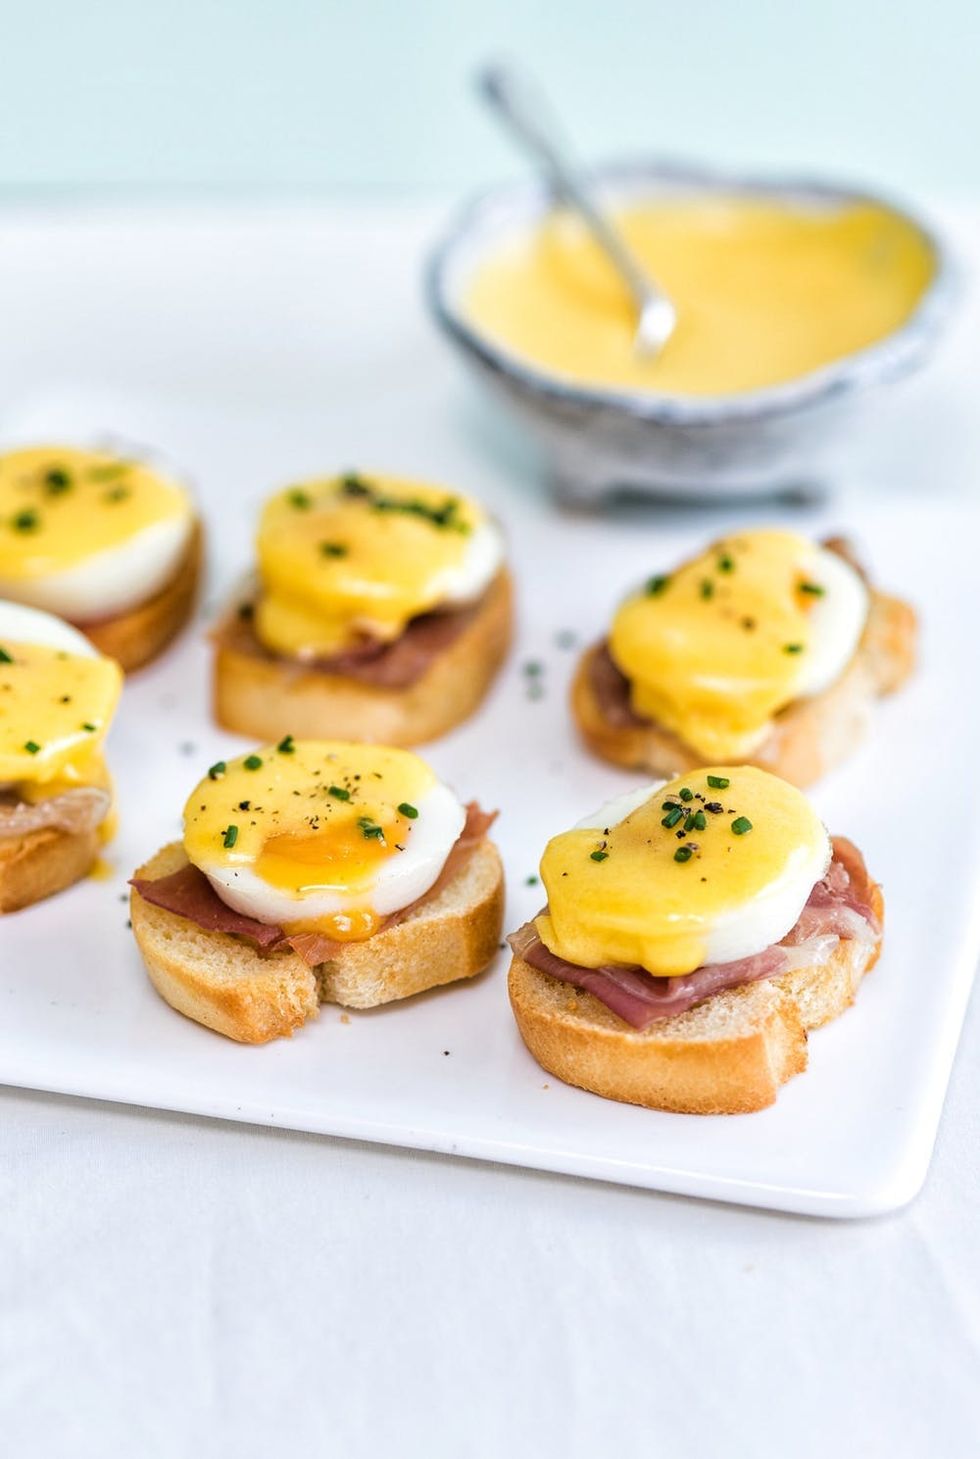 25 New Breakfast Recipe Ideas To Mix Up Your Mornings Brit Co